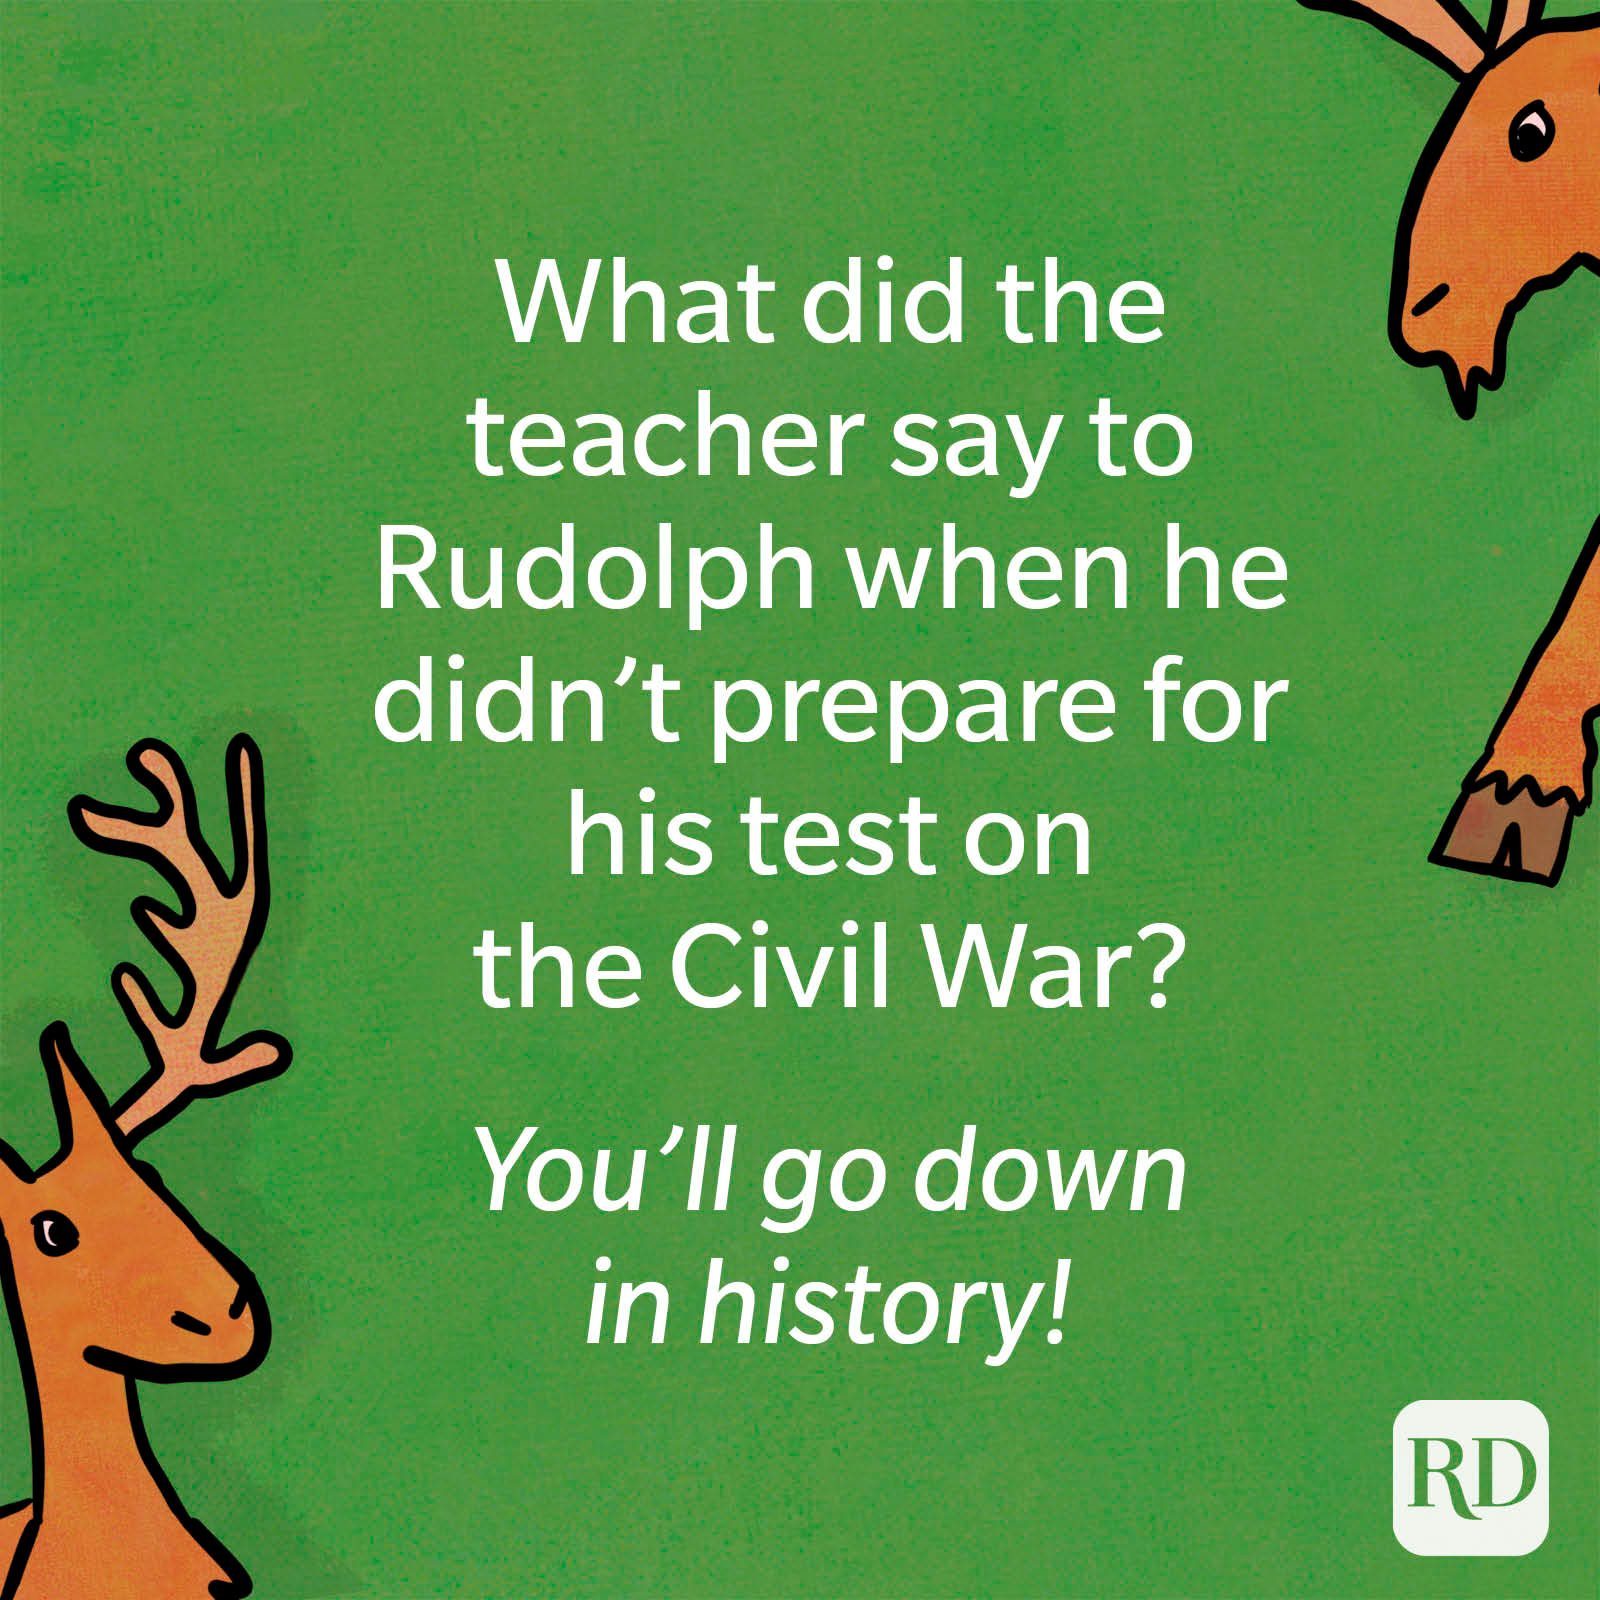 What did the teacher say to Rudolph when he didn’t prepare for his test on the Civil War? You'll go down in history.